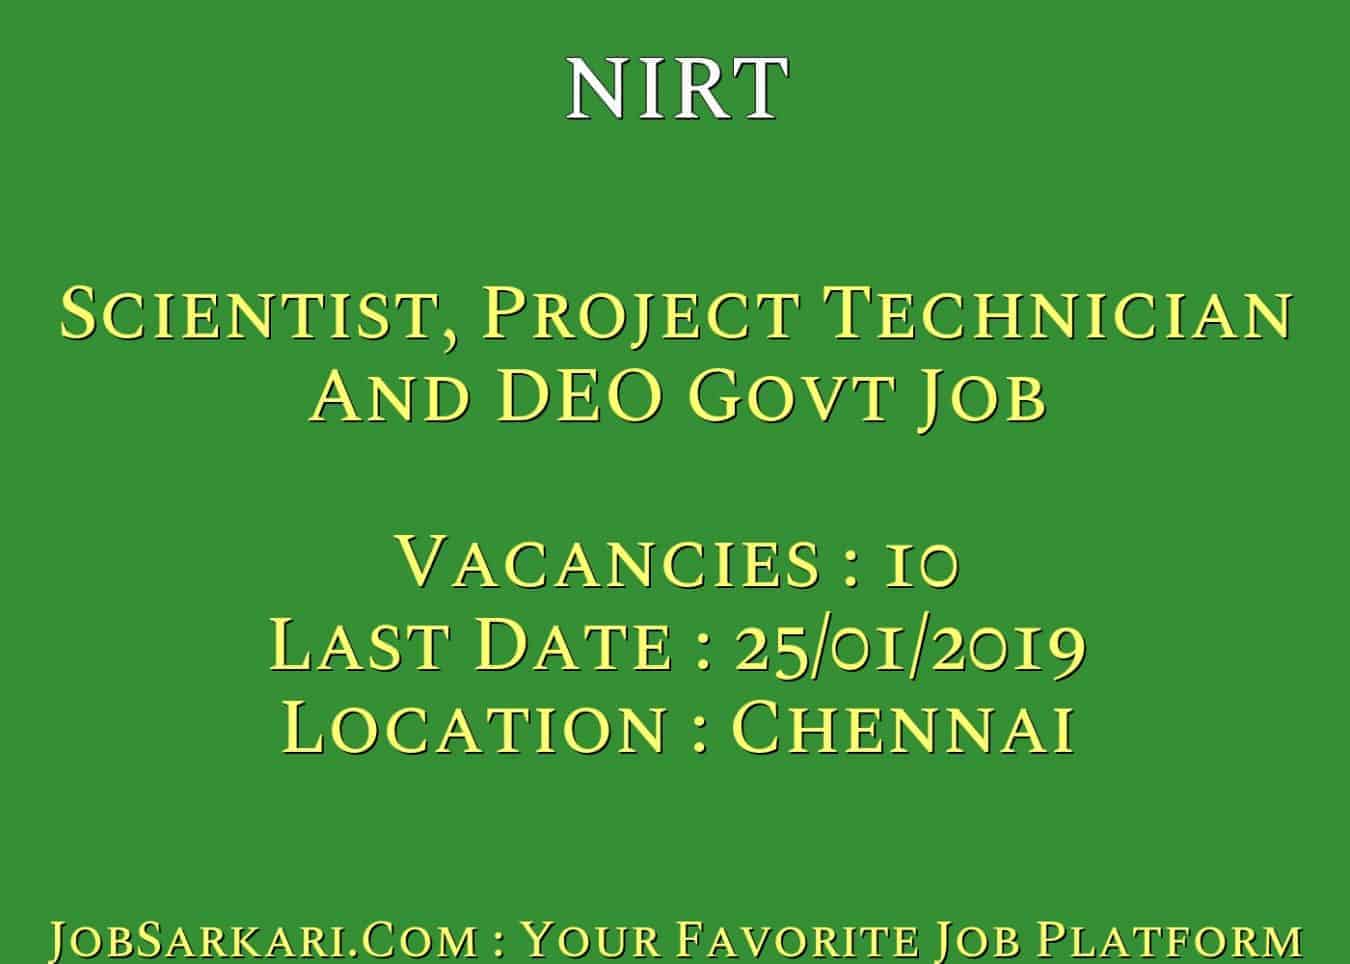 NIRT Recruitment 2018 For Scientist, Project Technician And DEO Govt Job